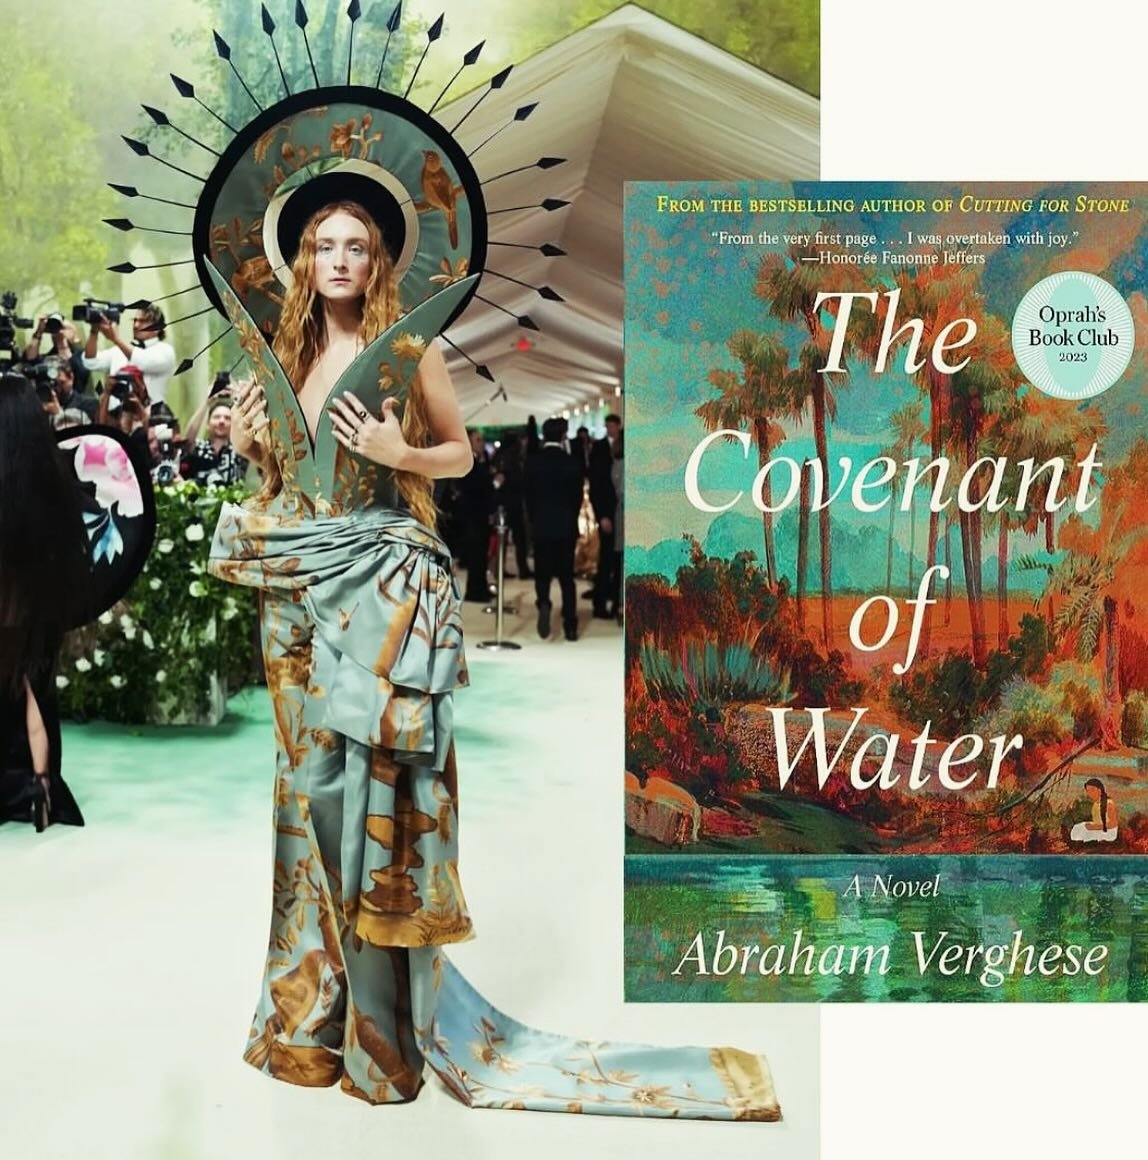 Fashion meets fiction. The Met Gala brought the looks, and Park City Library is bringing the books. What are you looking forward to reading this summer? Check out the entire list at @parkcitylibrary.